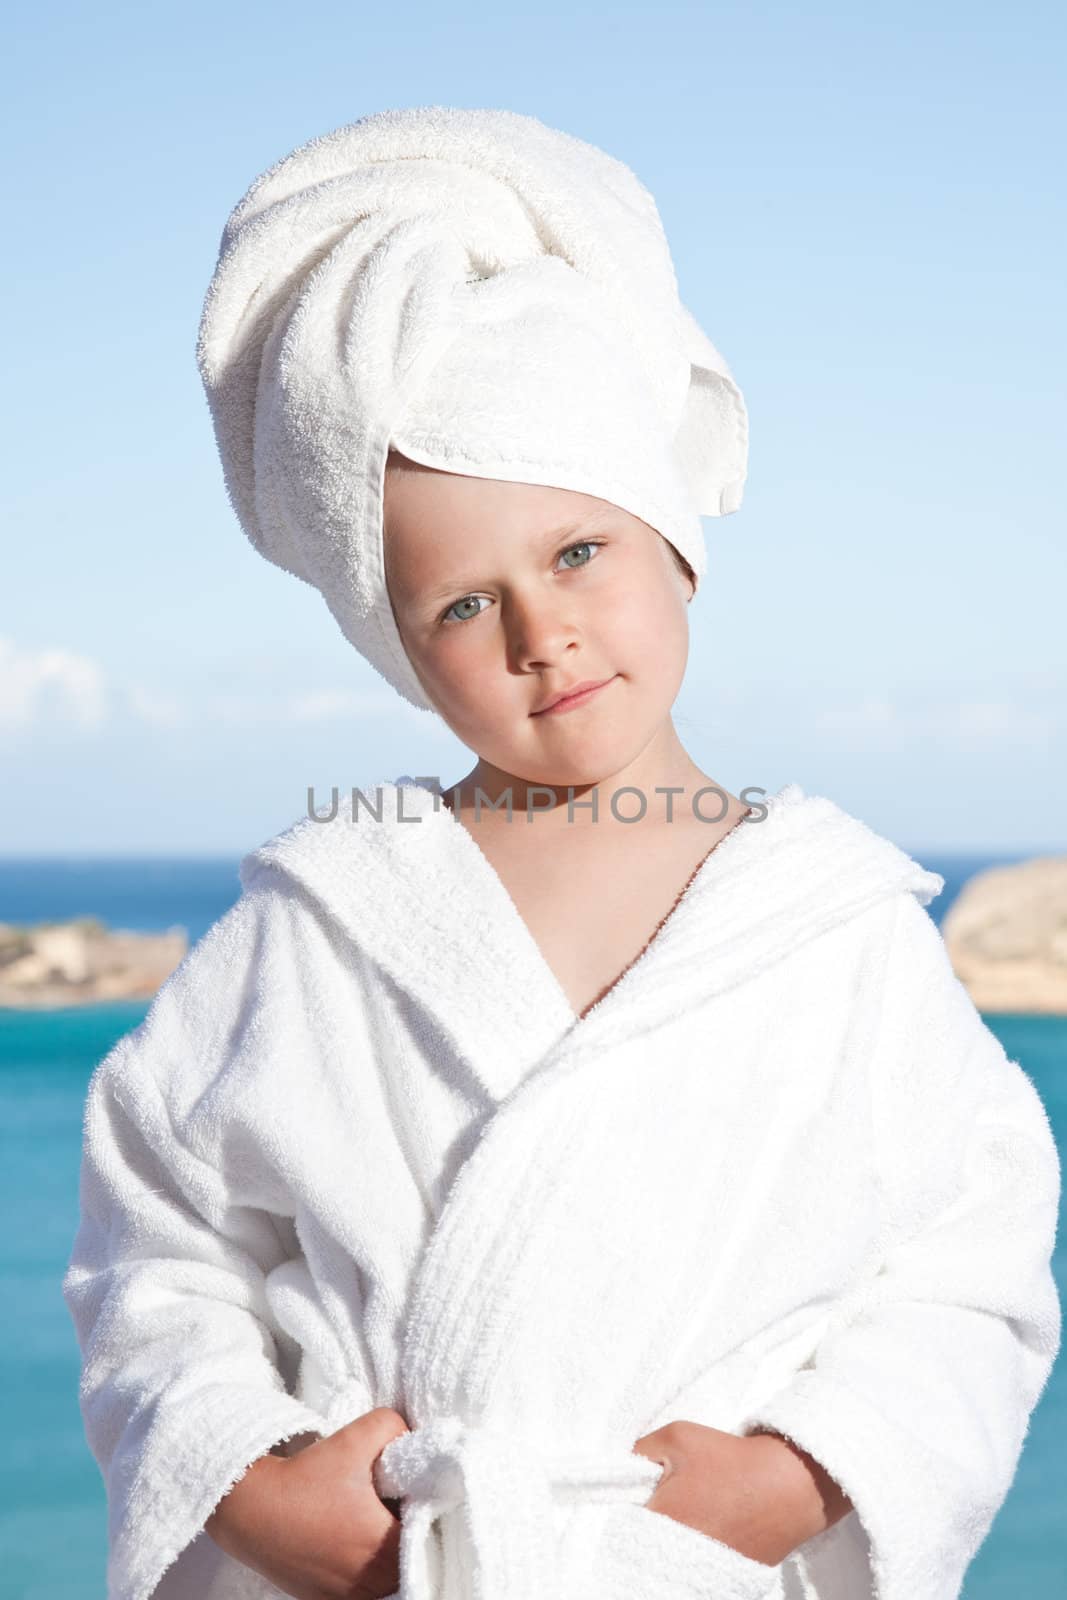 Portrait of happy smiling little girl with towel on the head in white bathrobe relaxing on terrace on the sea background